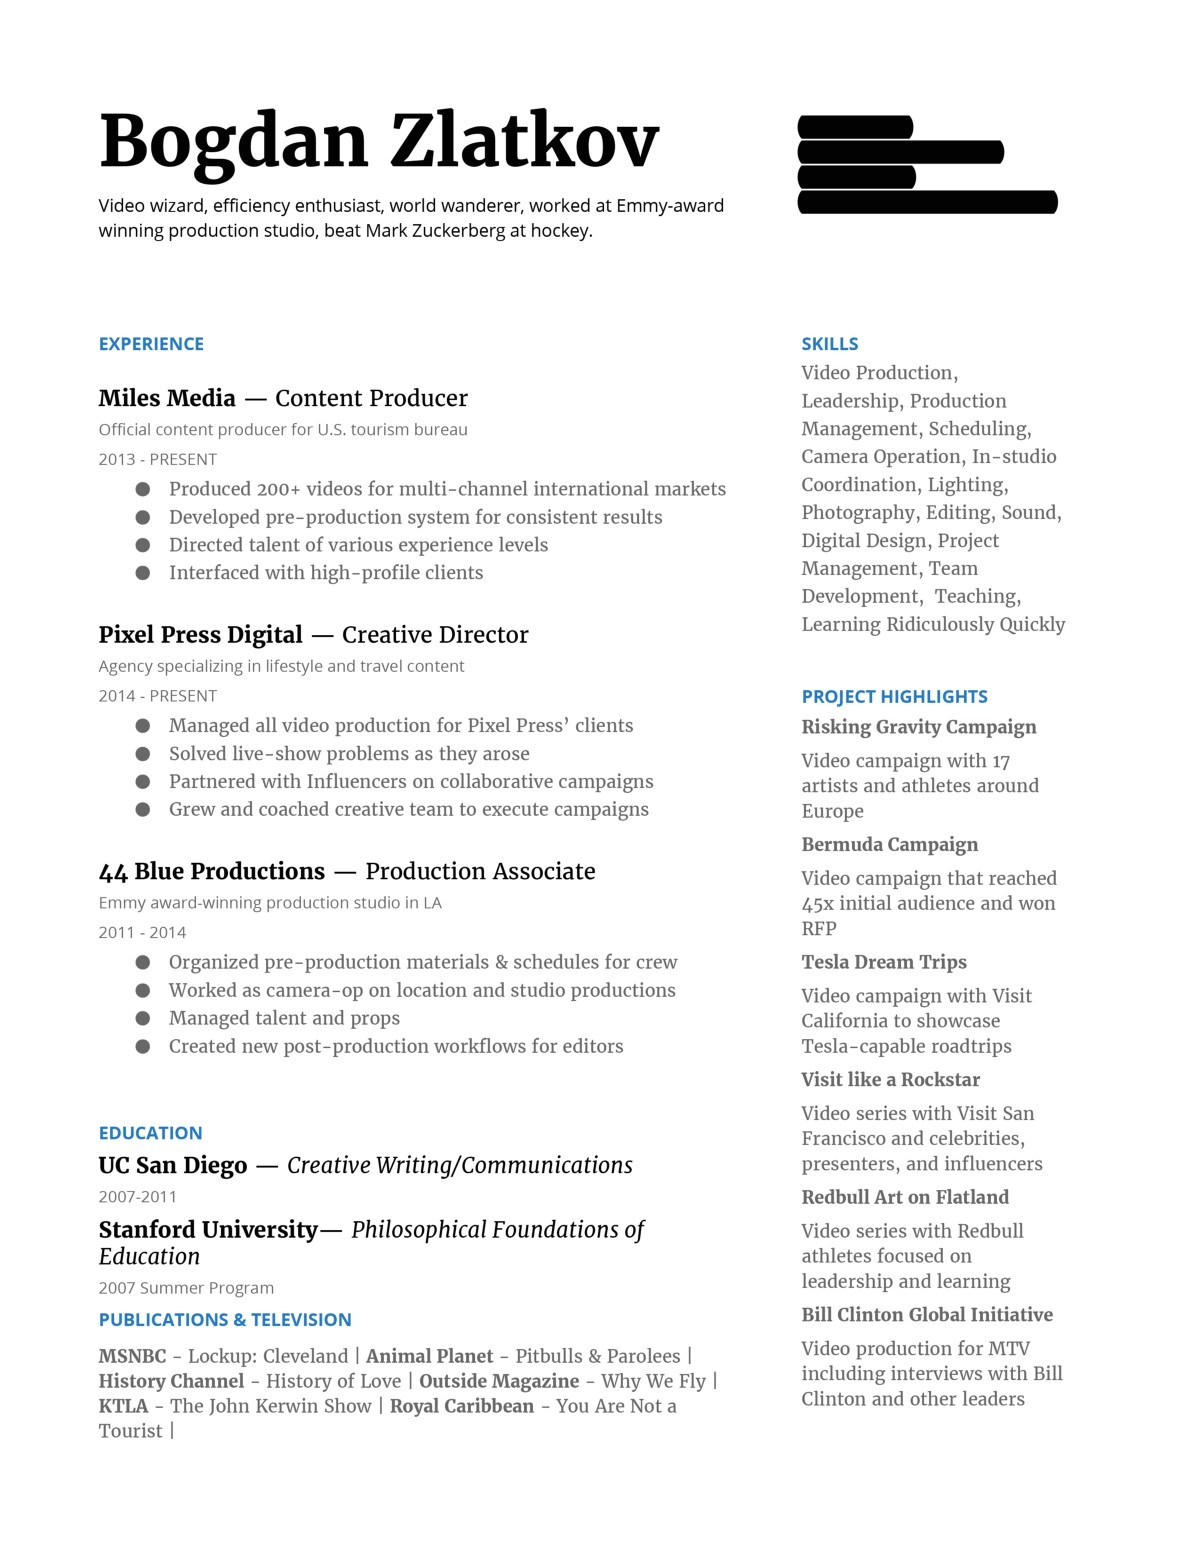 Condensed Resume Template How to Condense Your Resume to One Page Microsoft Word